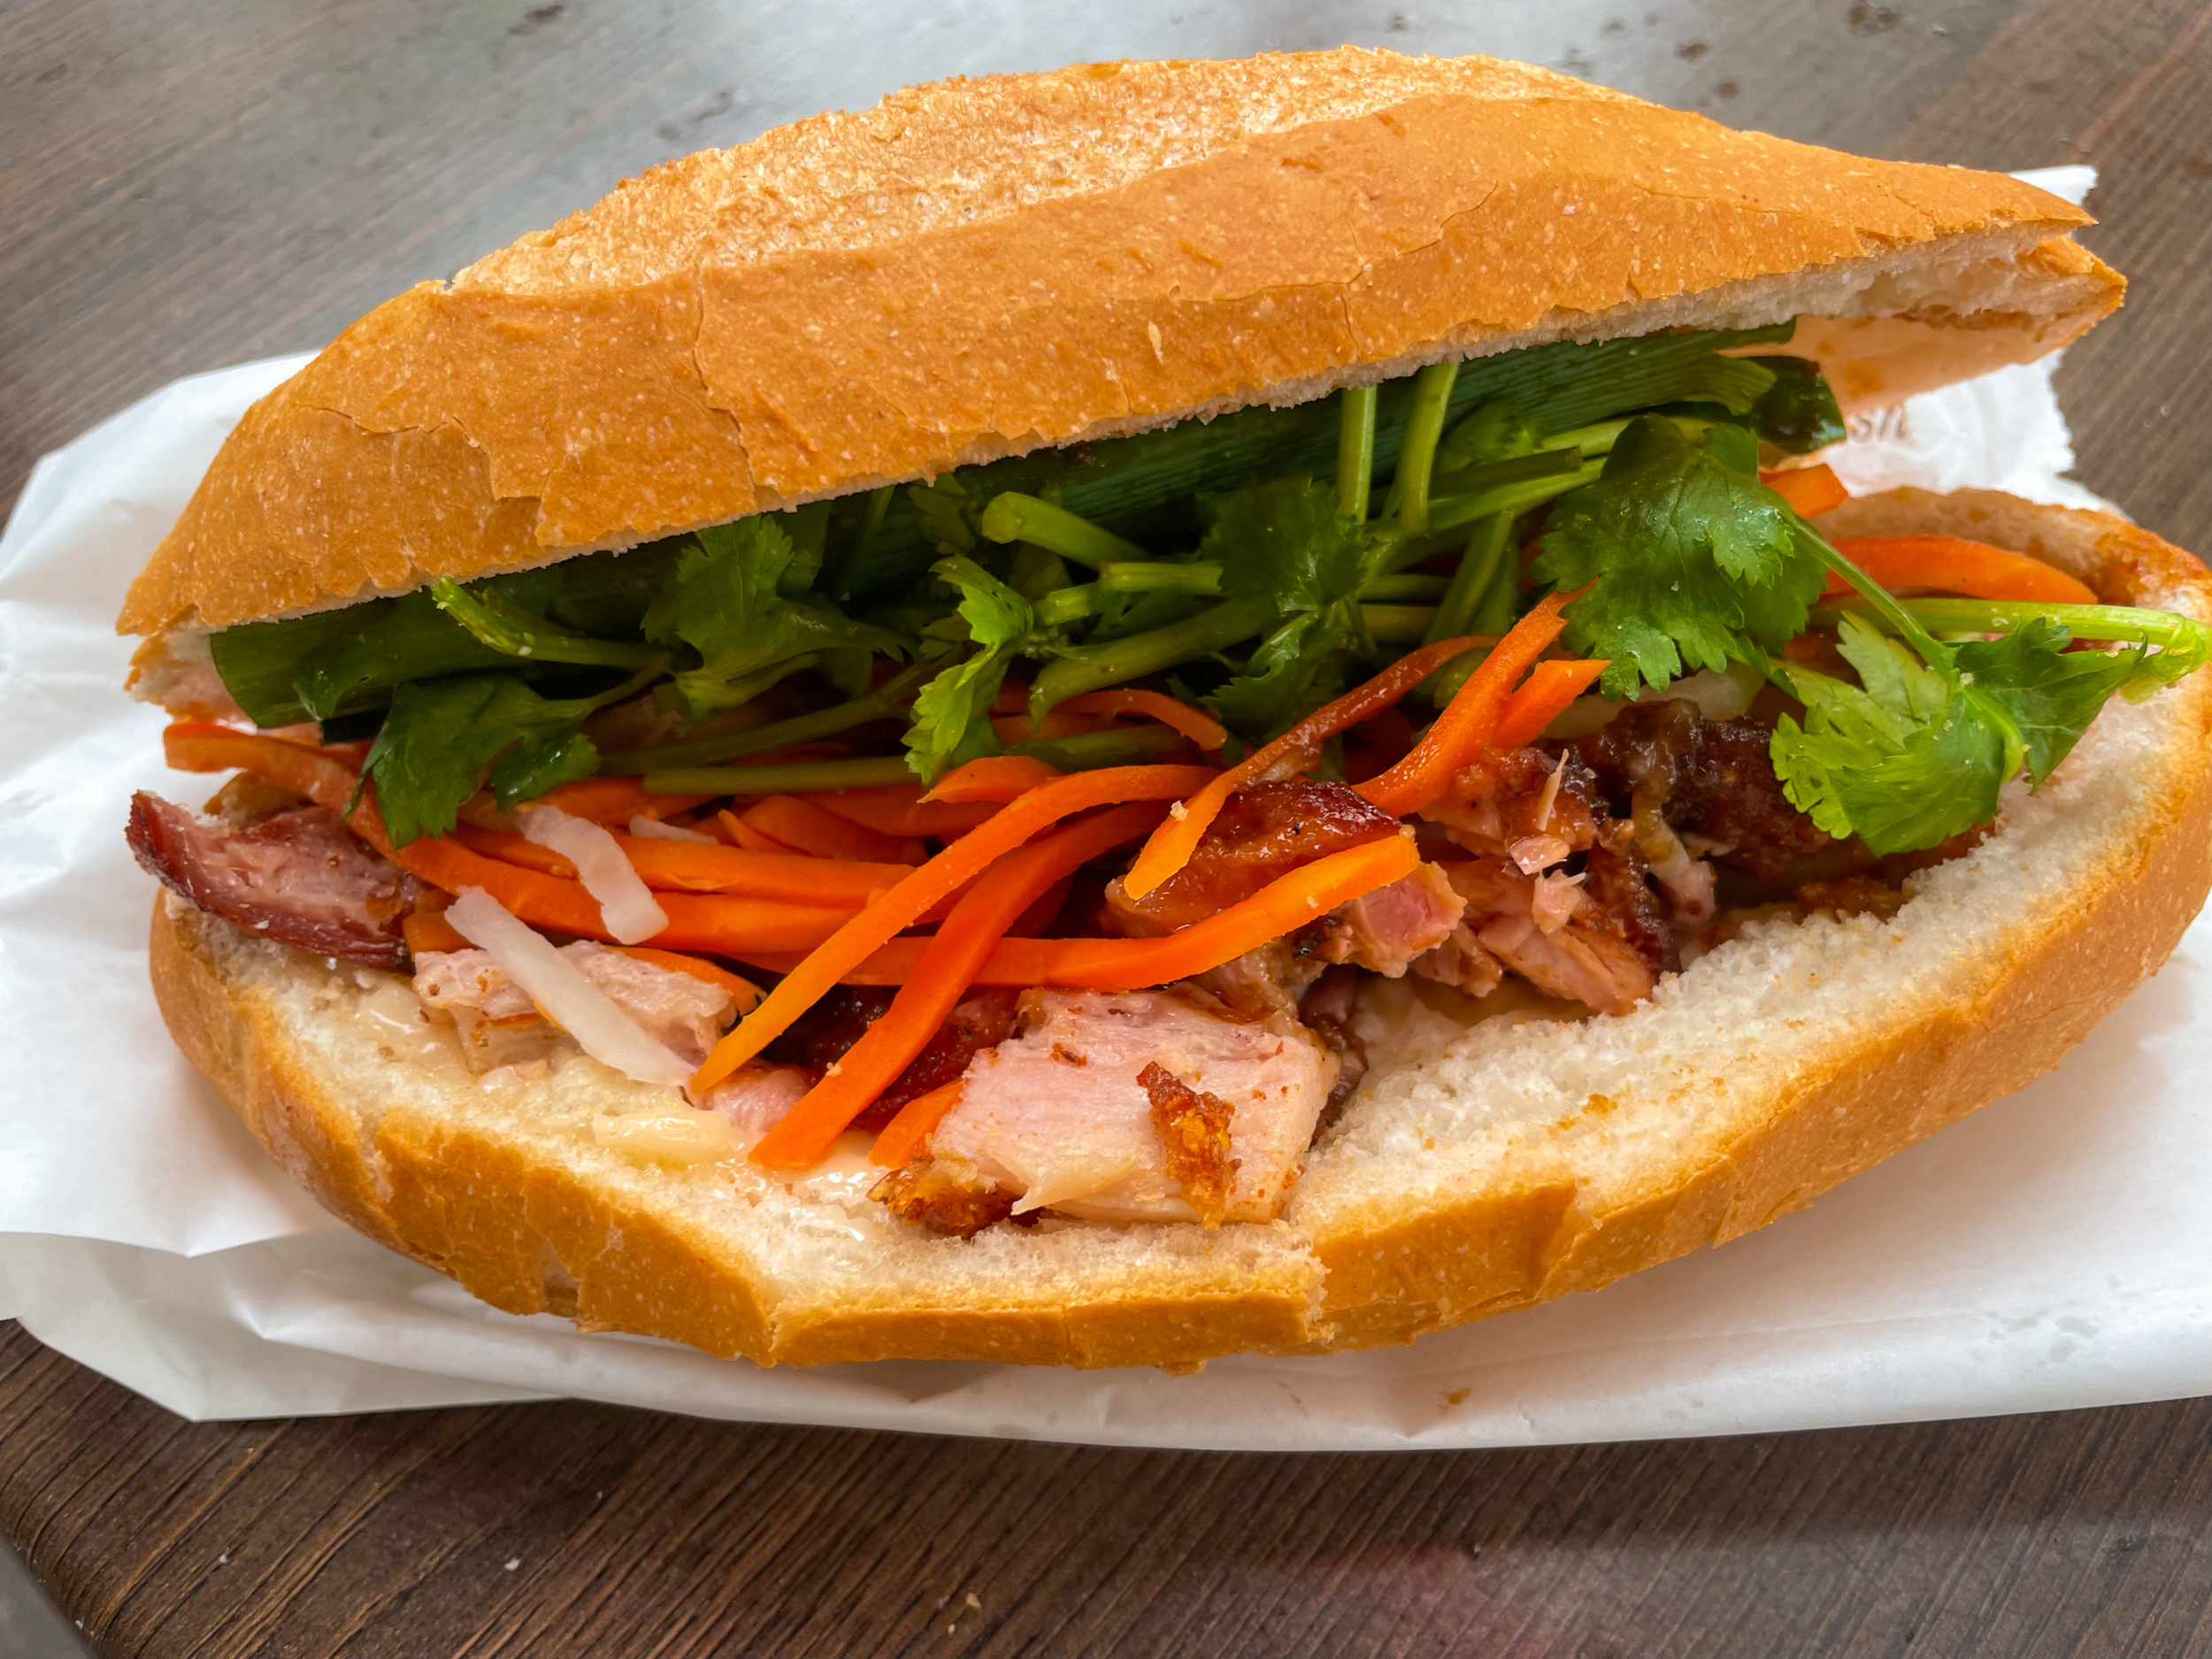 Banh mi bread roll with pork, coriander, and other fillings inside. Sitting on paper bag